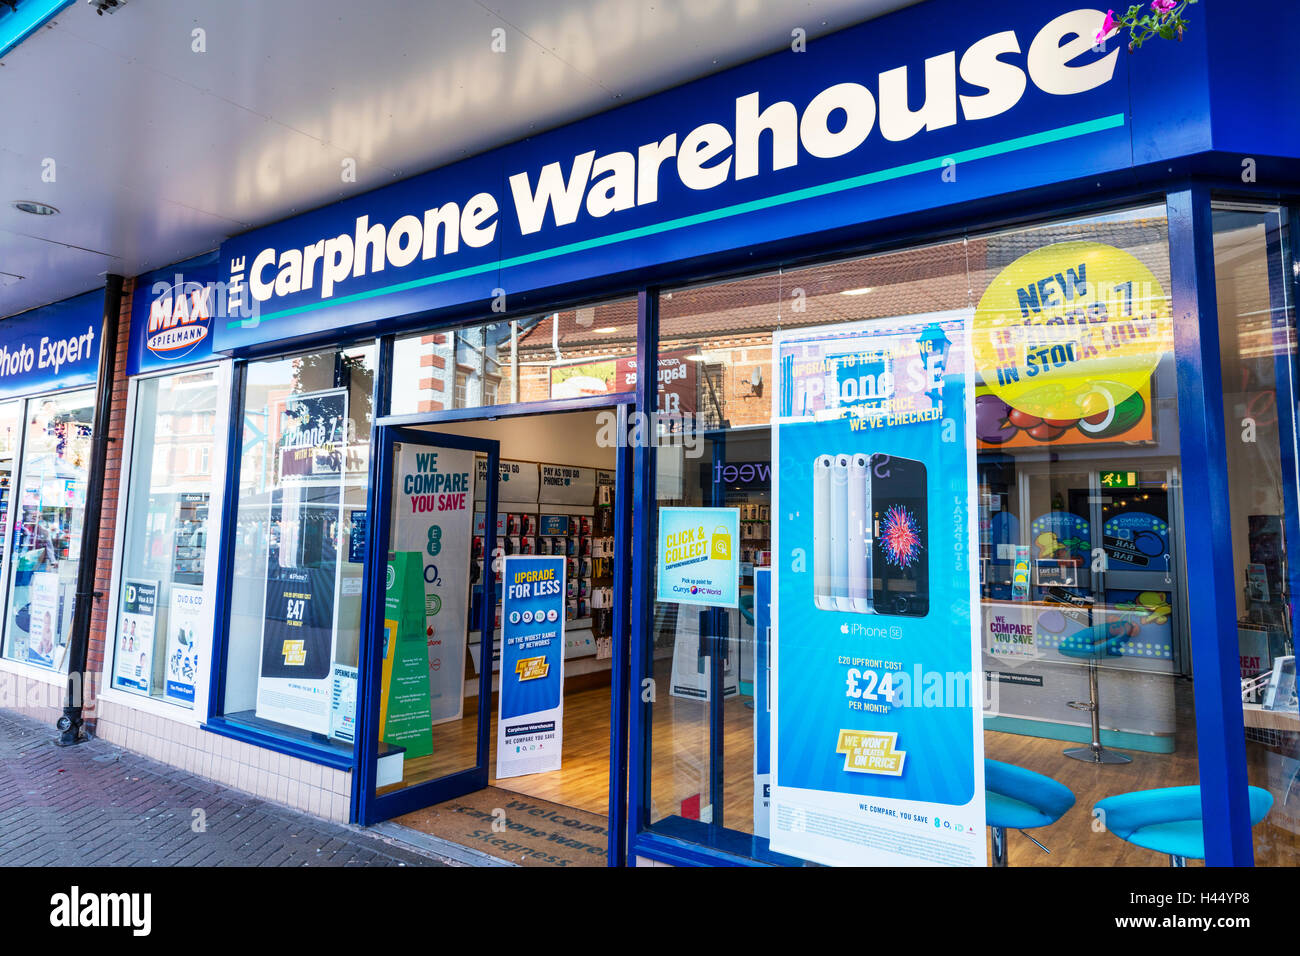 Carphone warehouse shop store front sign signs mobile phone shop sellers car phone warehouse UK England GB Stock Photo